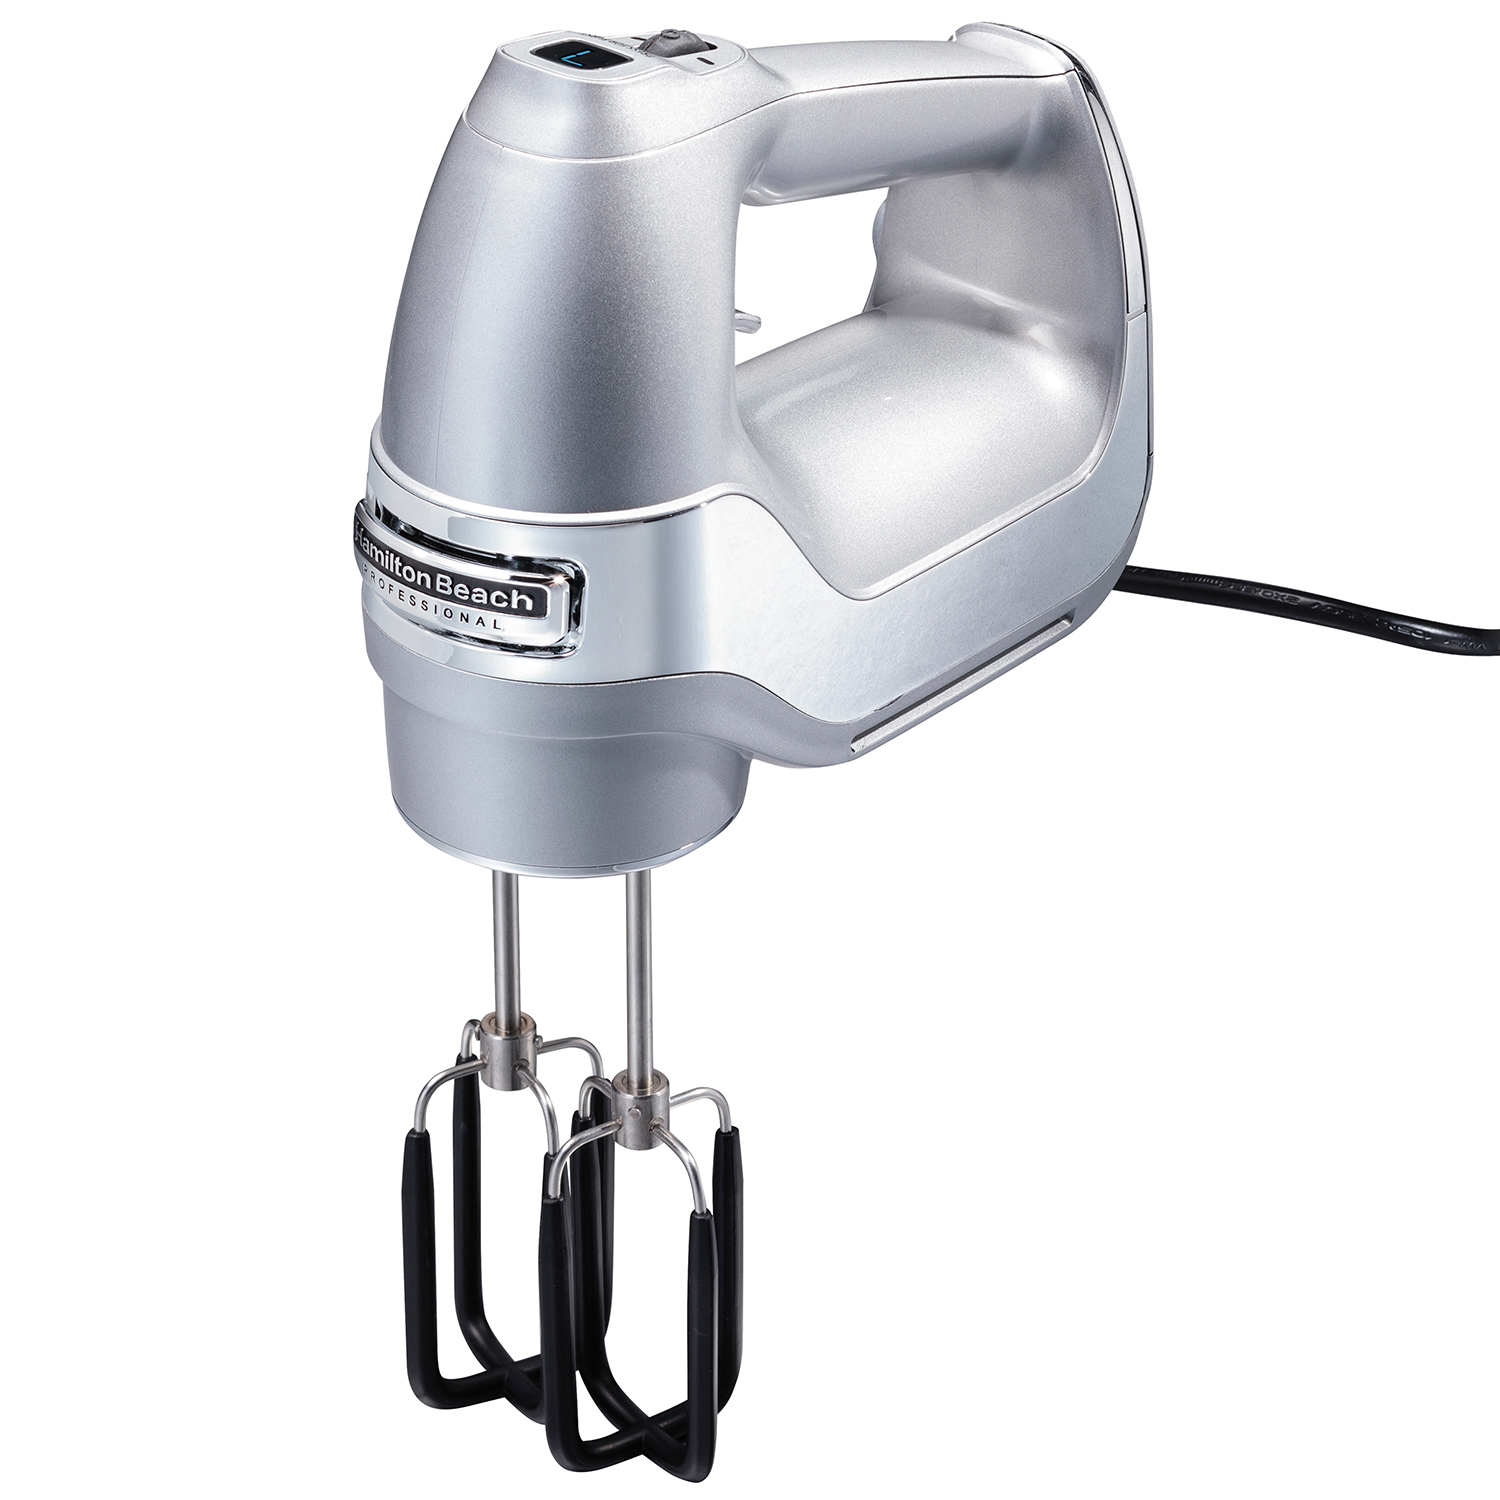 Purchase 7 Speed Hand Mixer now